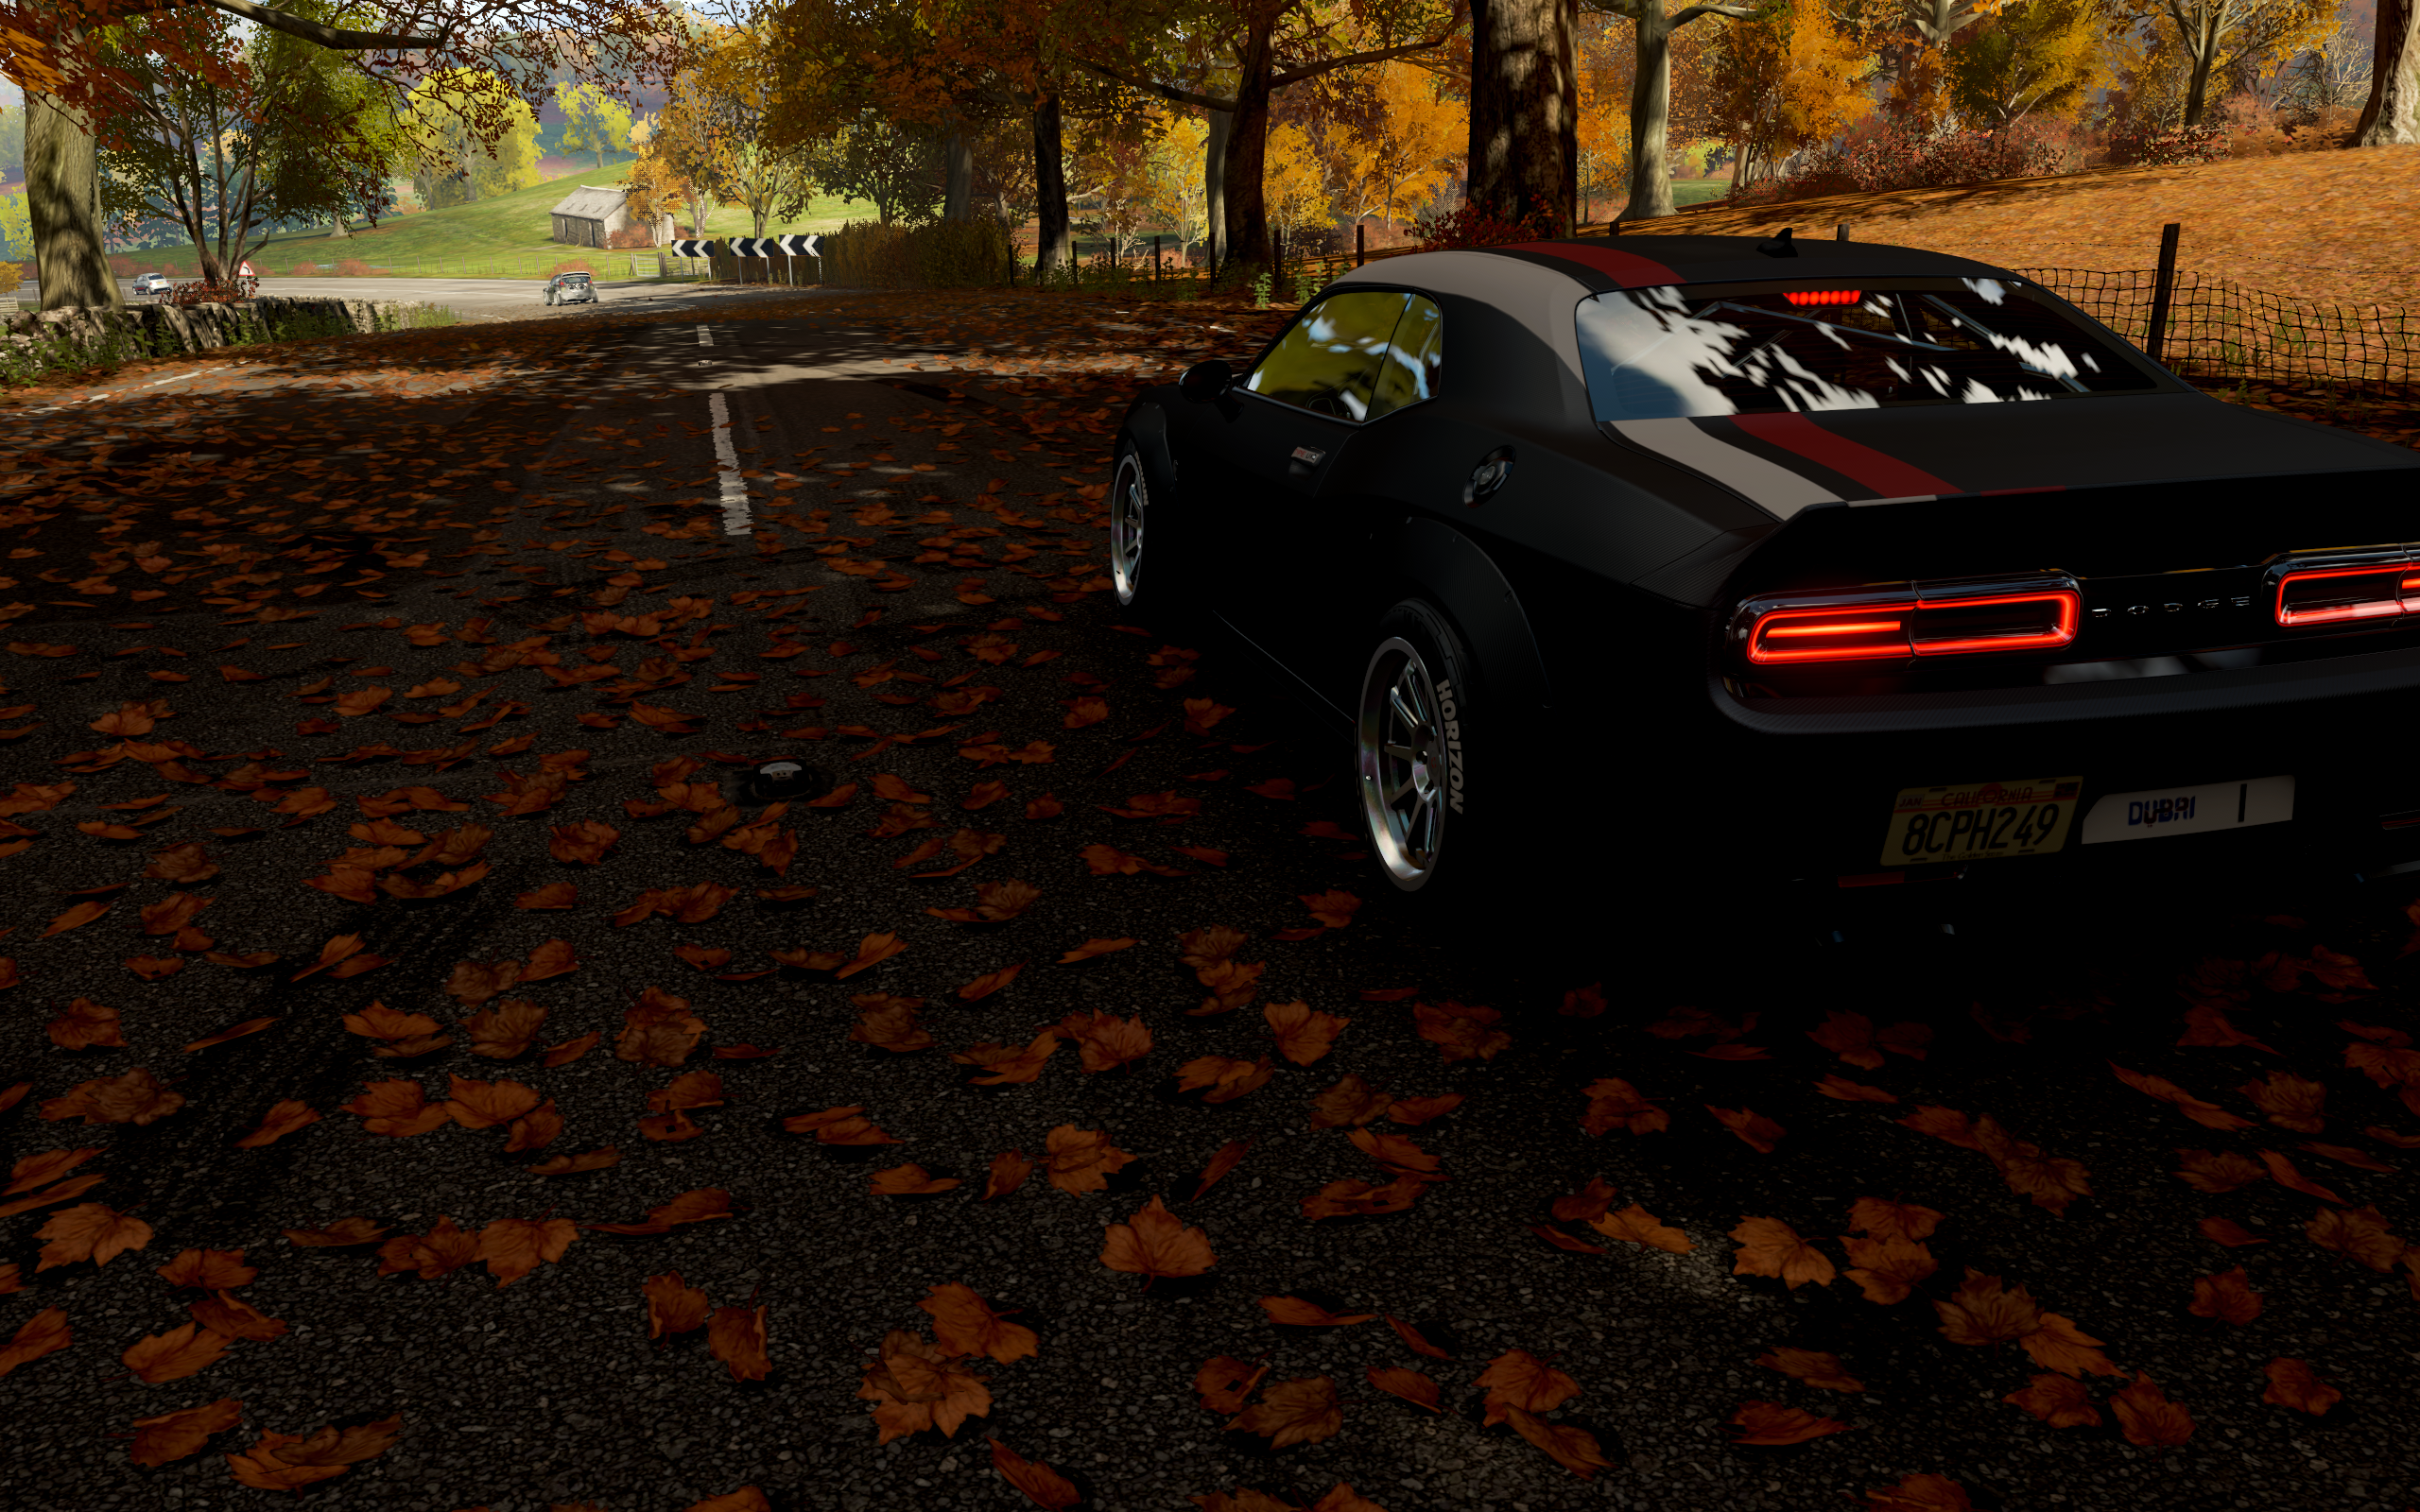 General 2560x1600 horizon line art clear sky still life taillights Autumn Boar Dodge Challenger car plate carrier fall golden brown reflection rear view leaves licence plates vehicle trees Dodge muscle cars American cars Stellantis Forza Horizon 4 video games PlaygroundGames